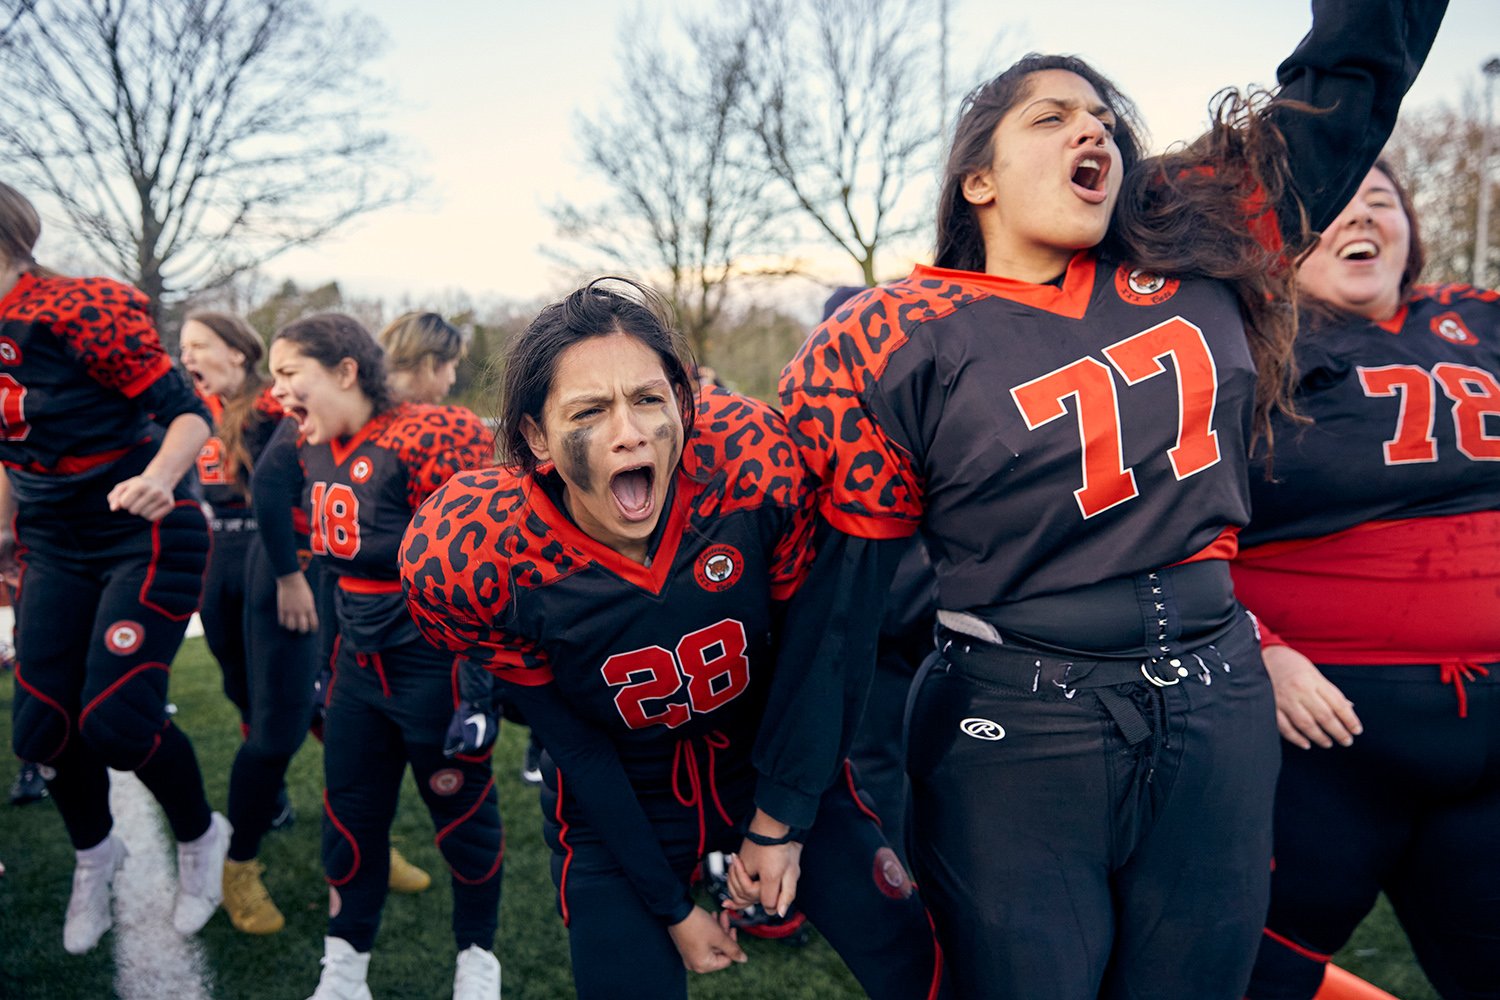  Dami (left), a running back for the Amsterdam Cats, and her sister Sitara, a center guard, celebrate an interception by the Cats' defense during the 2021 Queens Bowl matchup against the Rotterdam Ravens, Amsterdam, NL, 2021. 